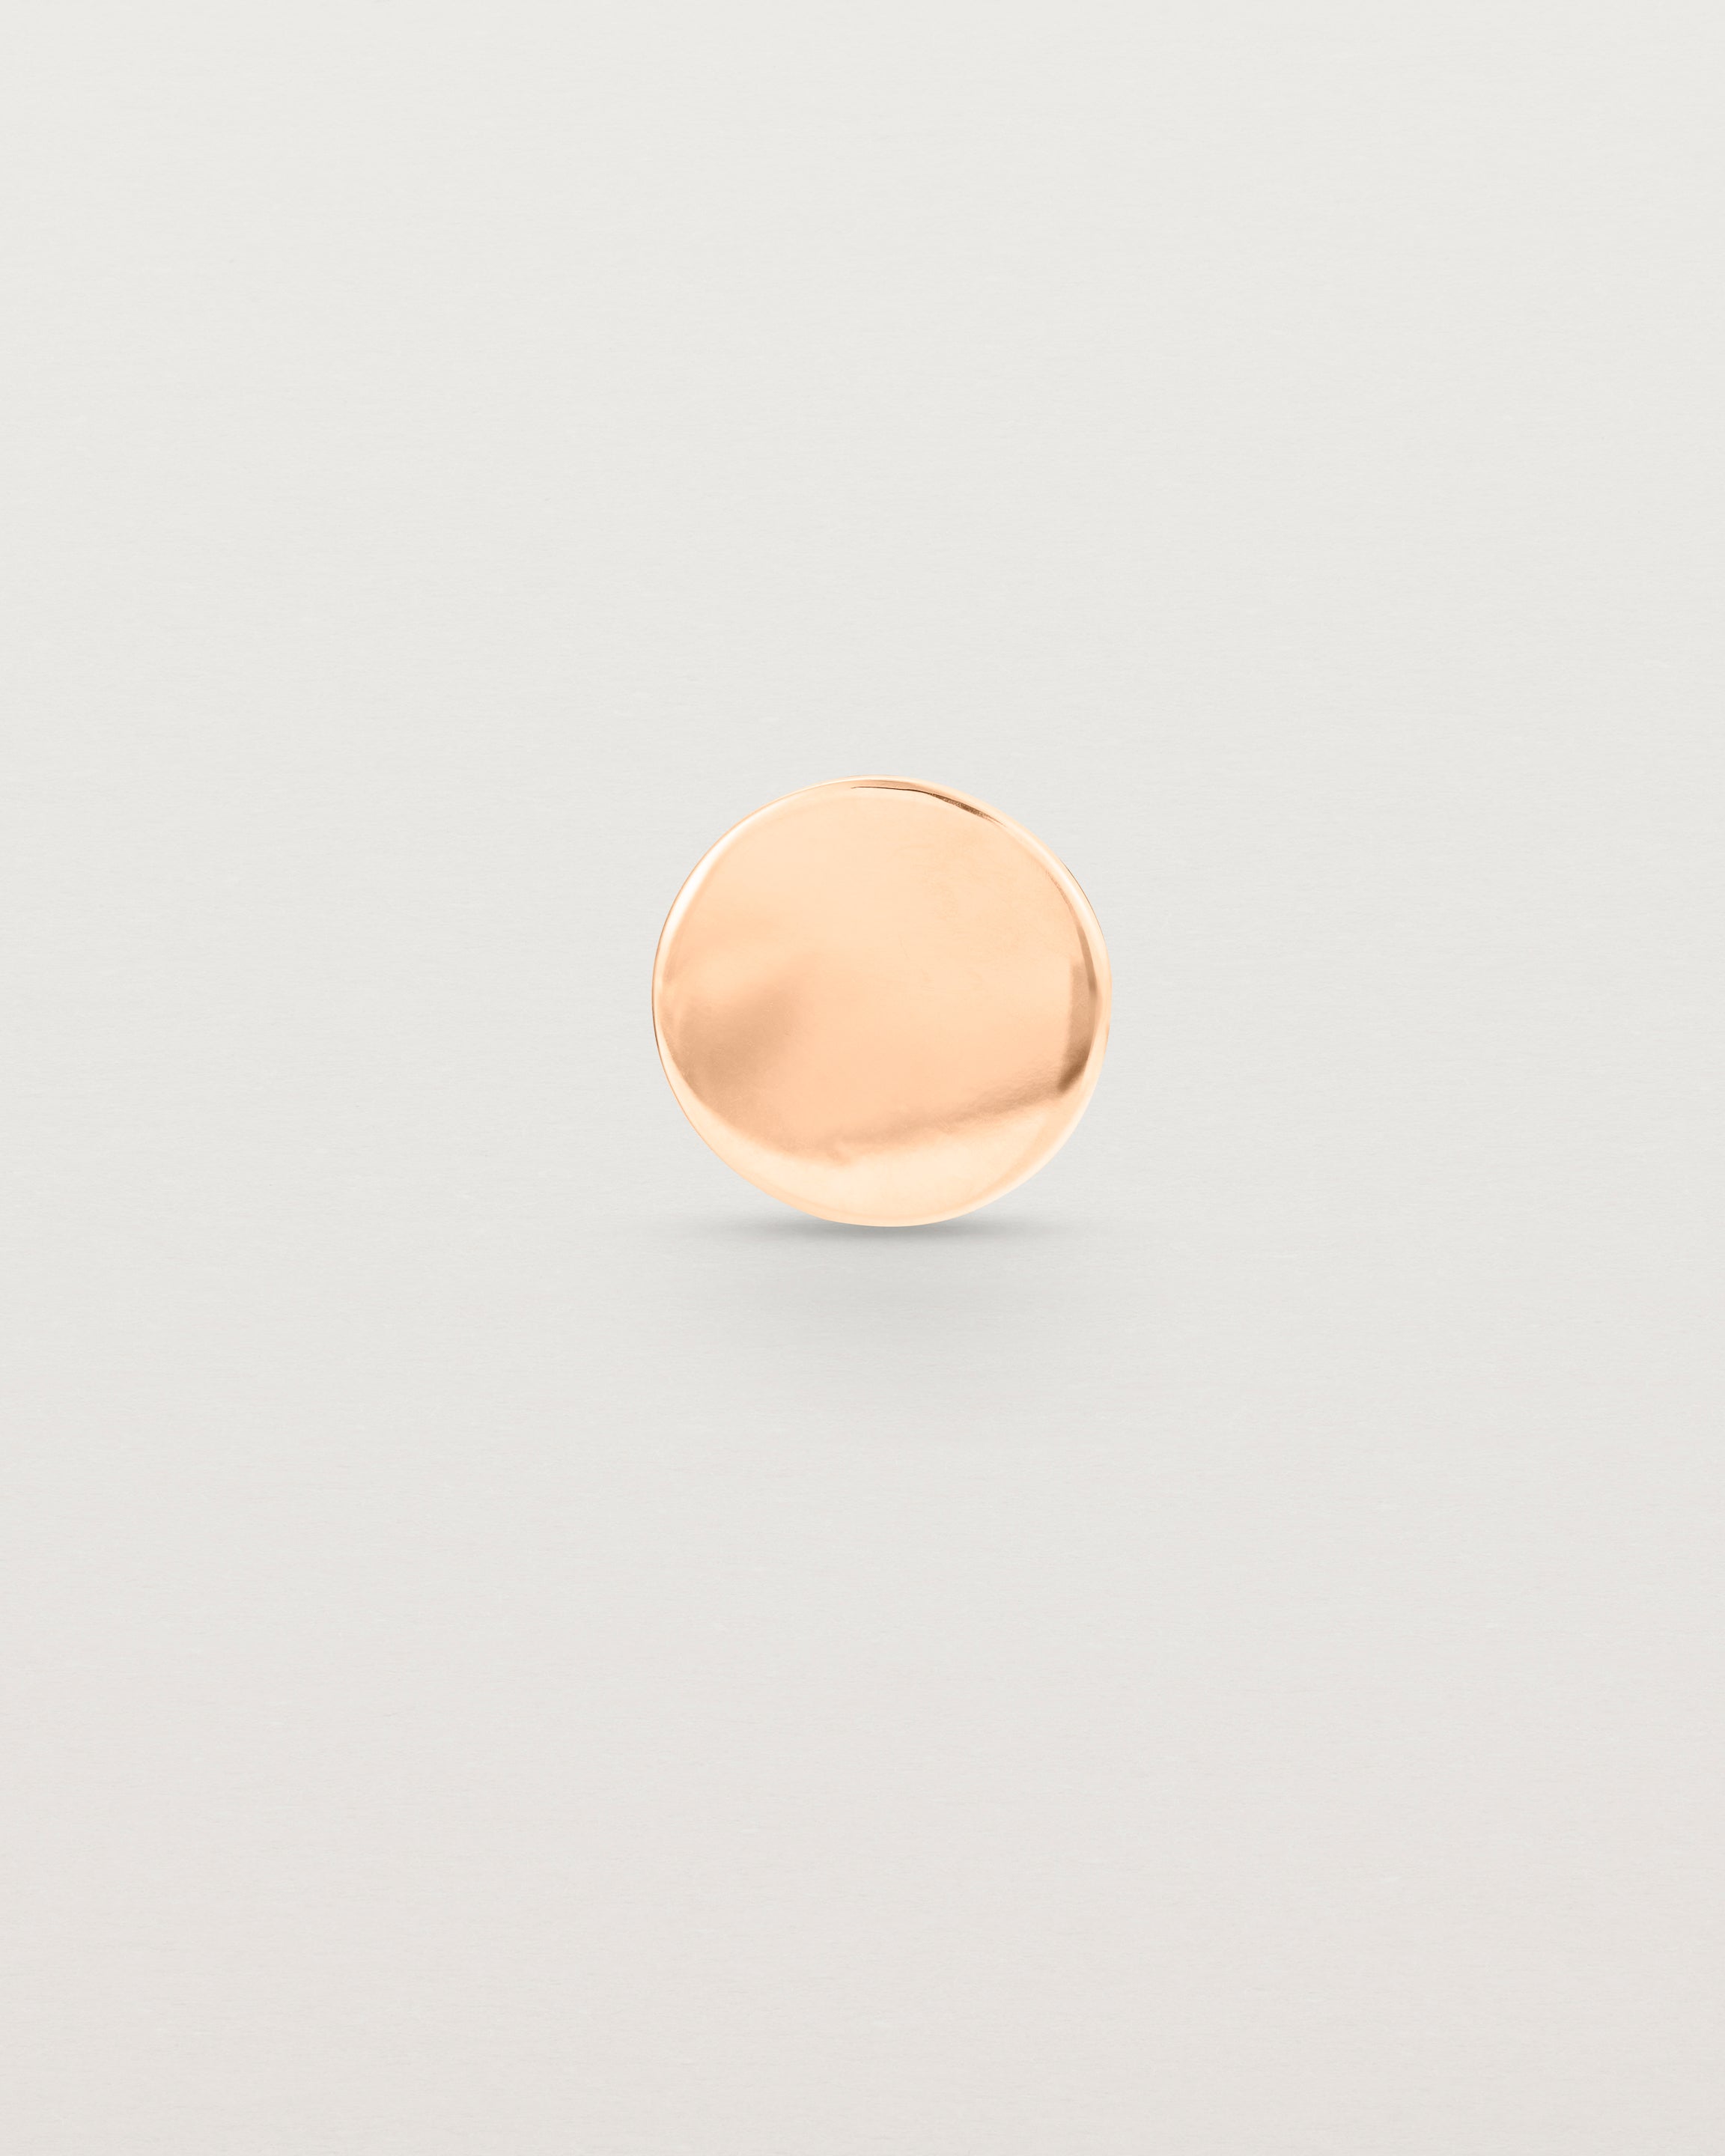 A round rose gold lapel pin